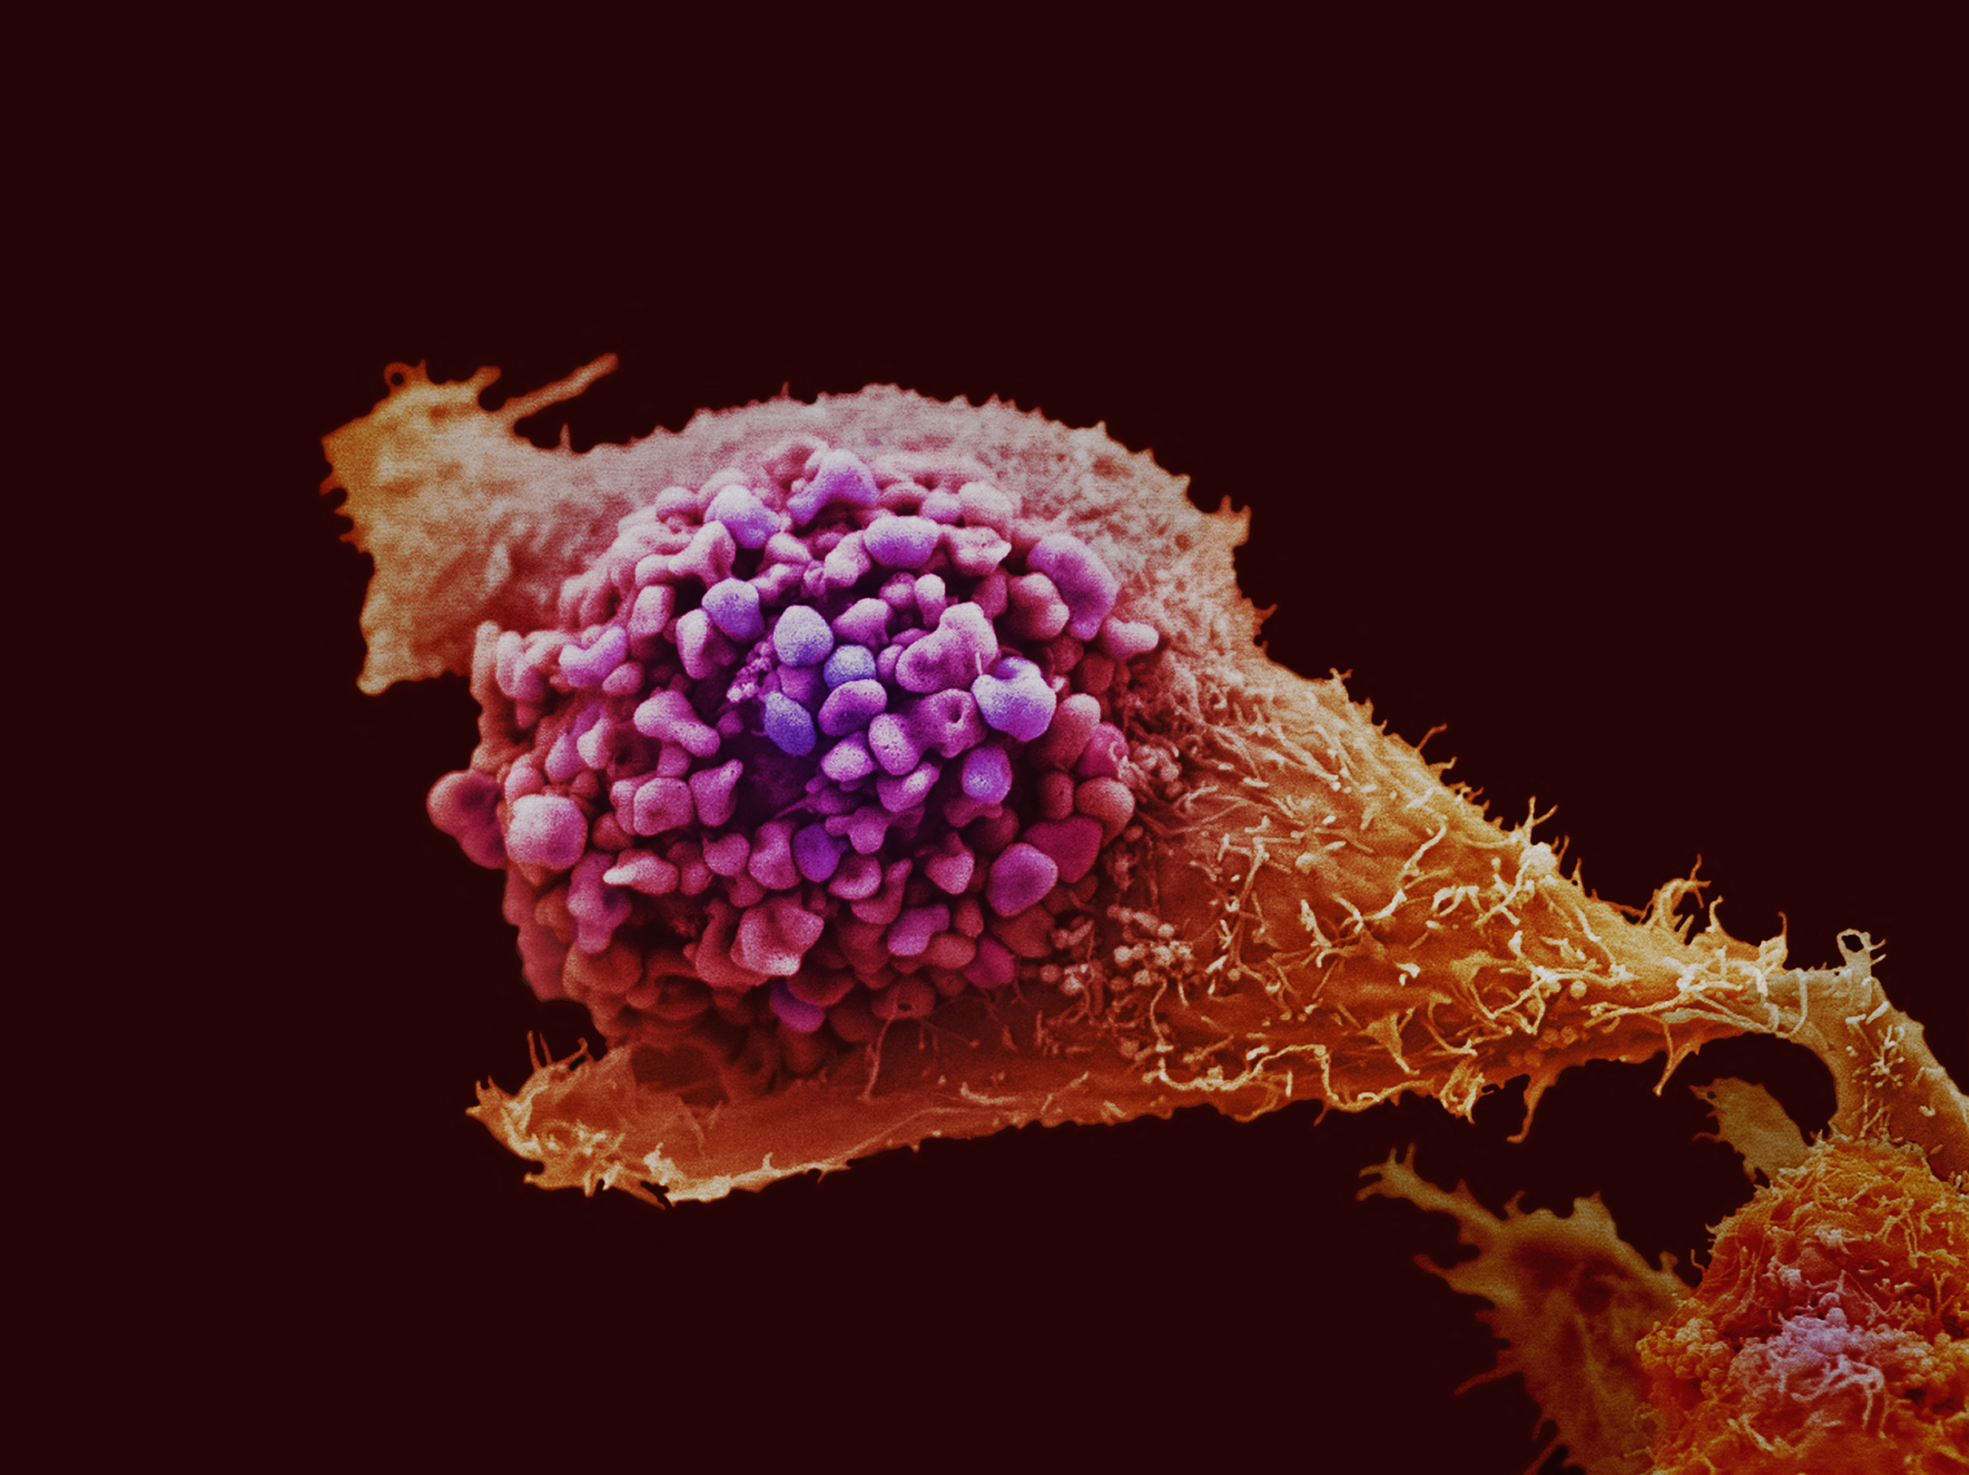 Prostate cancer cell imaged using electron microscopy and coloured artificially